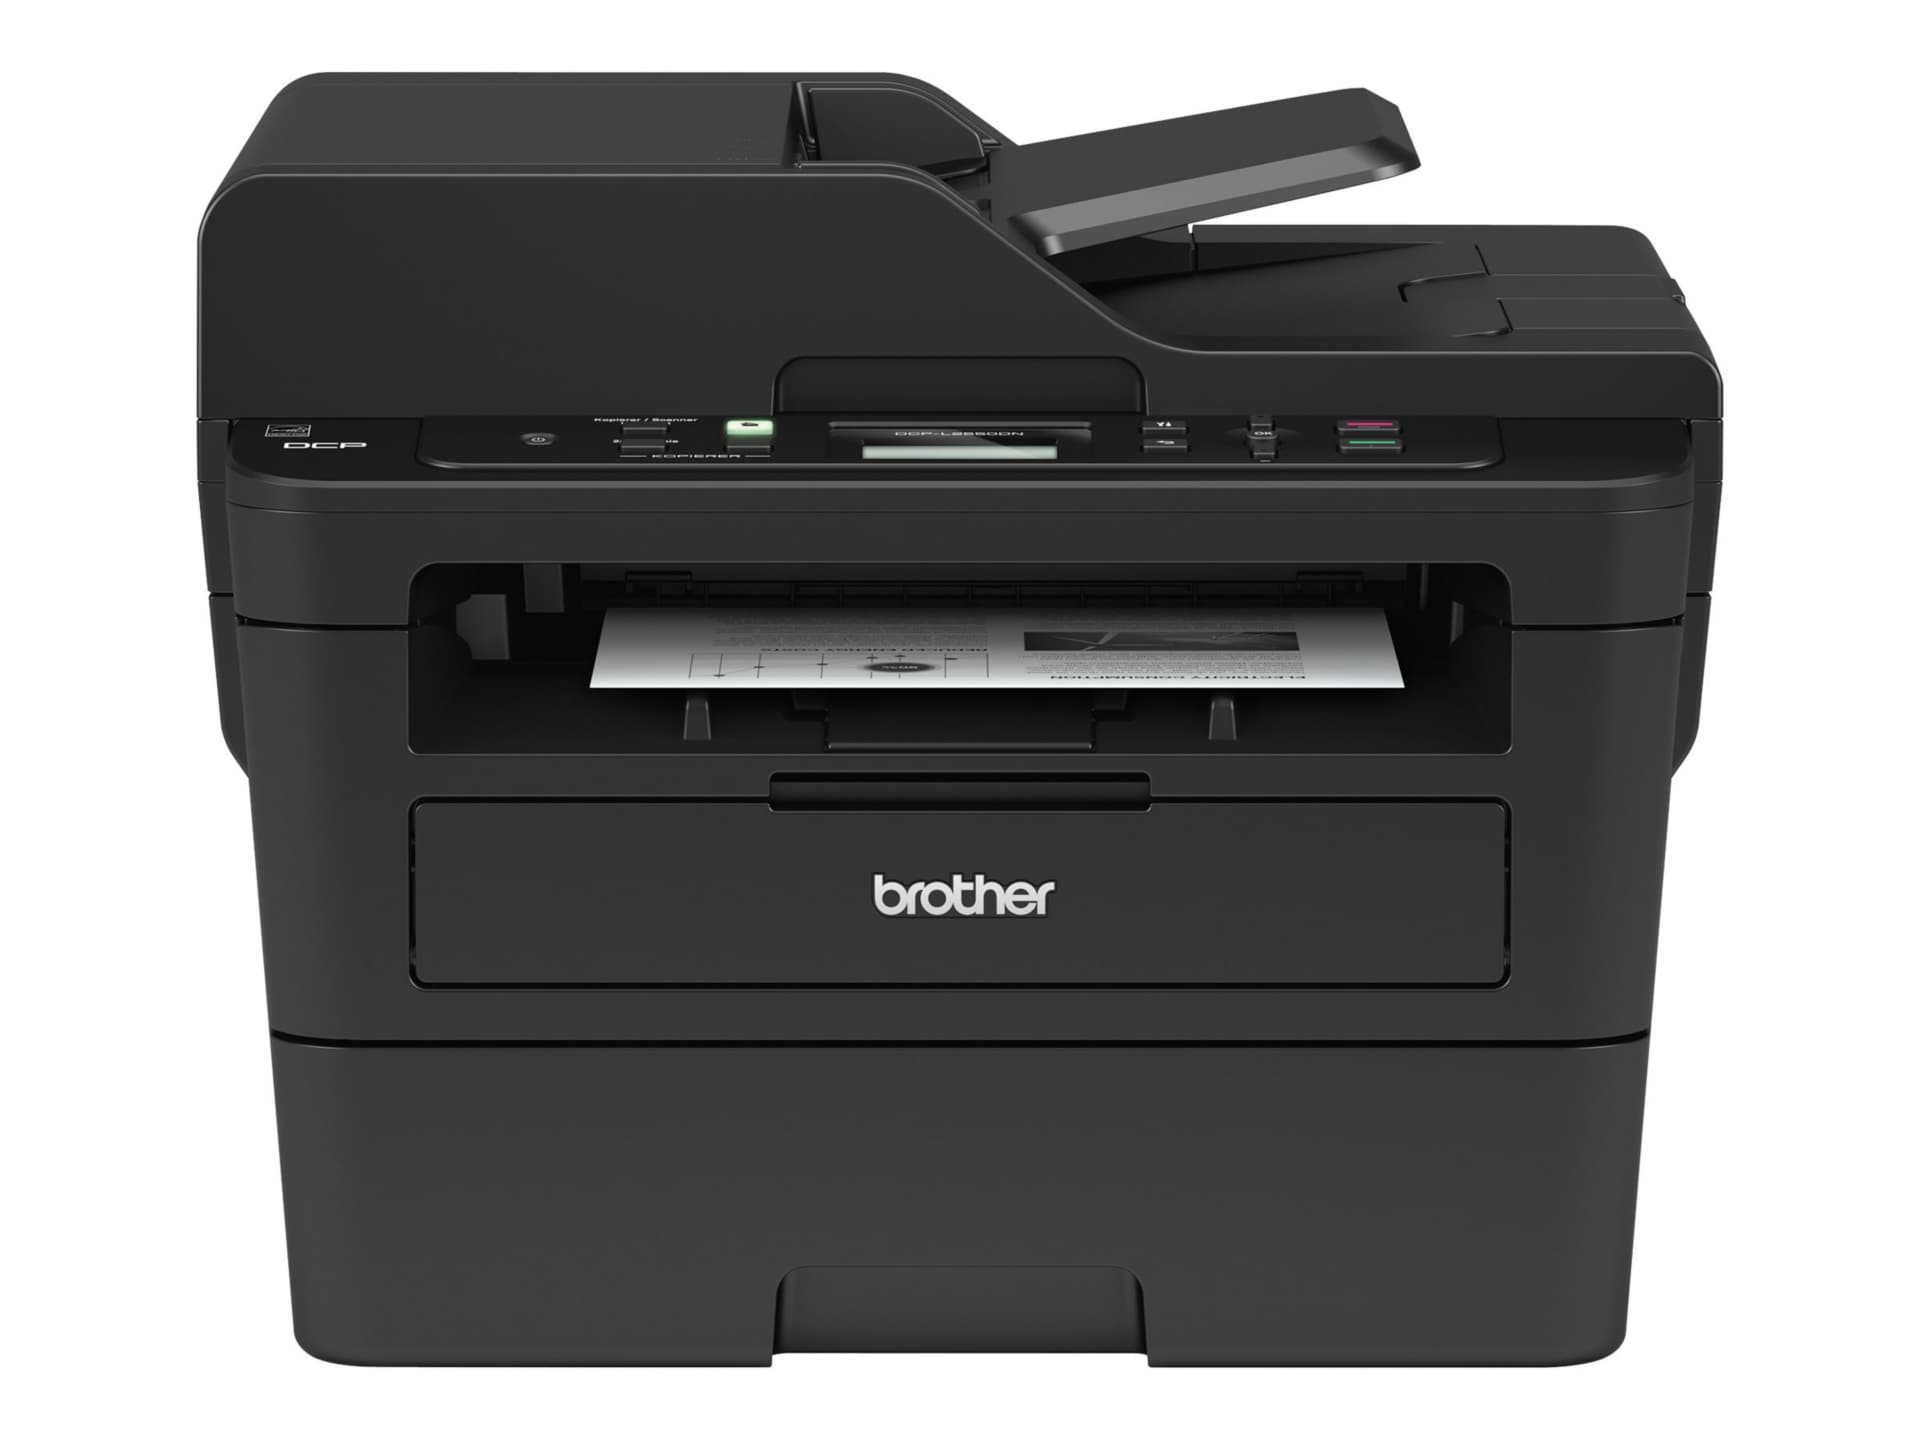 Brother DCP-L2550DW - multifunction printer - B/W